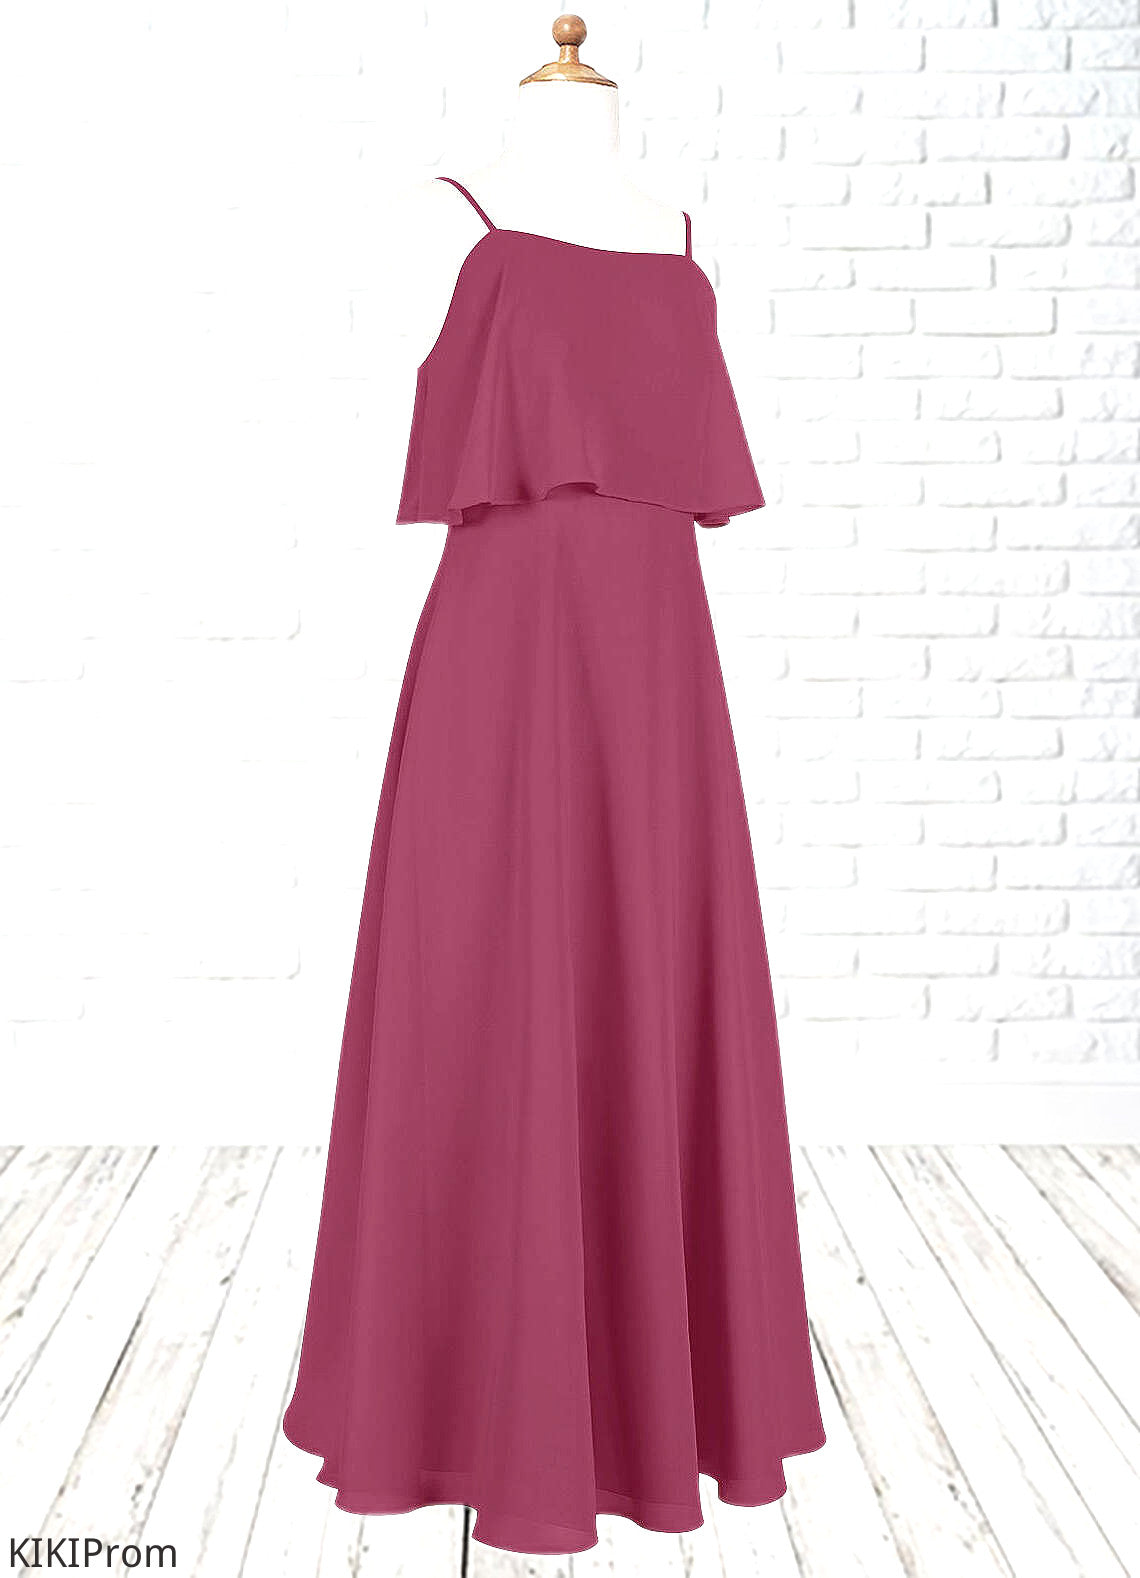 Anabelle A-Line Ruched Chiffon Floor-Length Junior Bridesmaid Dress Mulberry DZP0022874